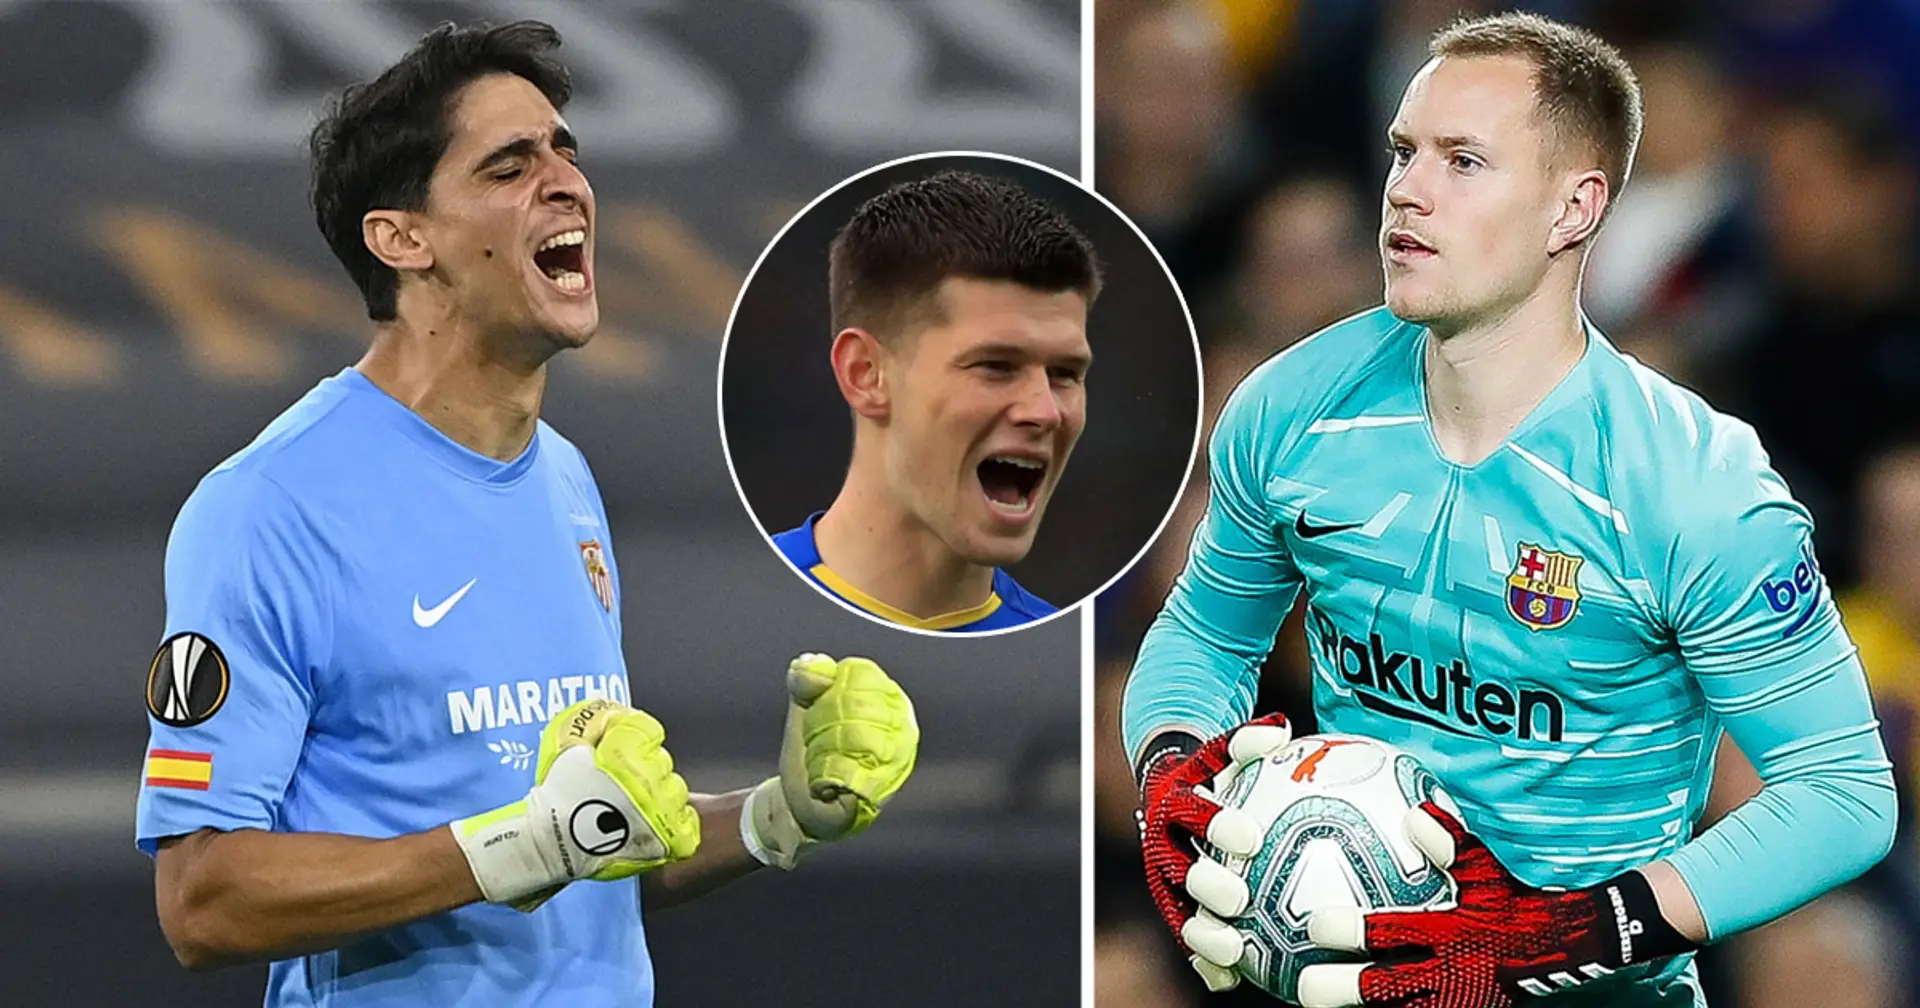 Barca identify 5 goalkeeper targets who could compete with Ter Stegen next season (reliability: 3 stars) 